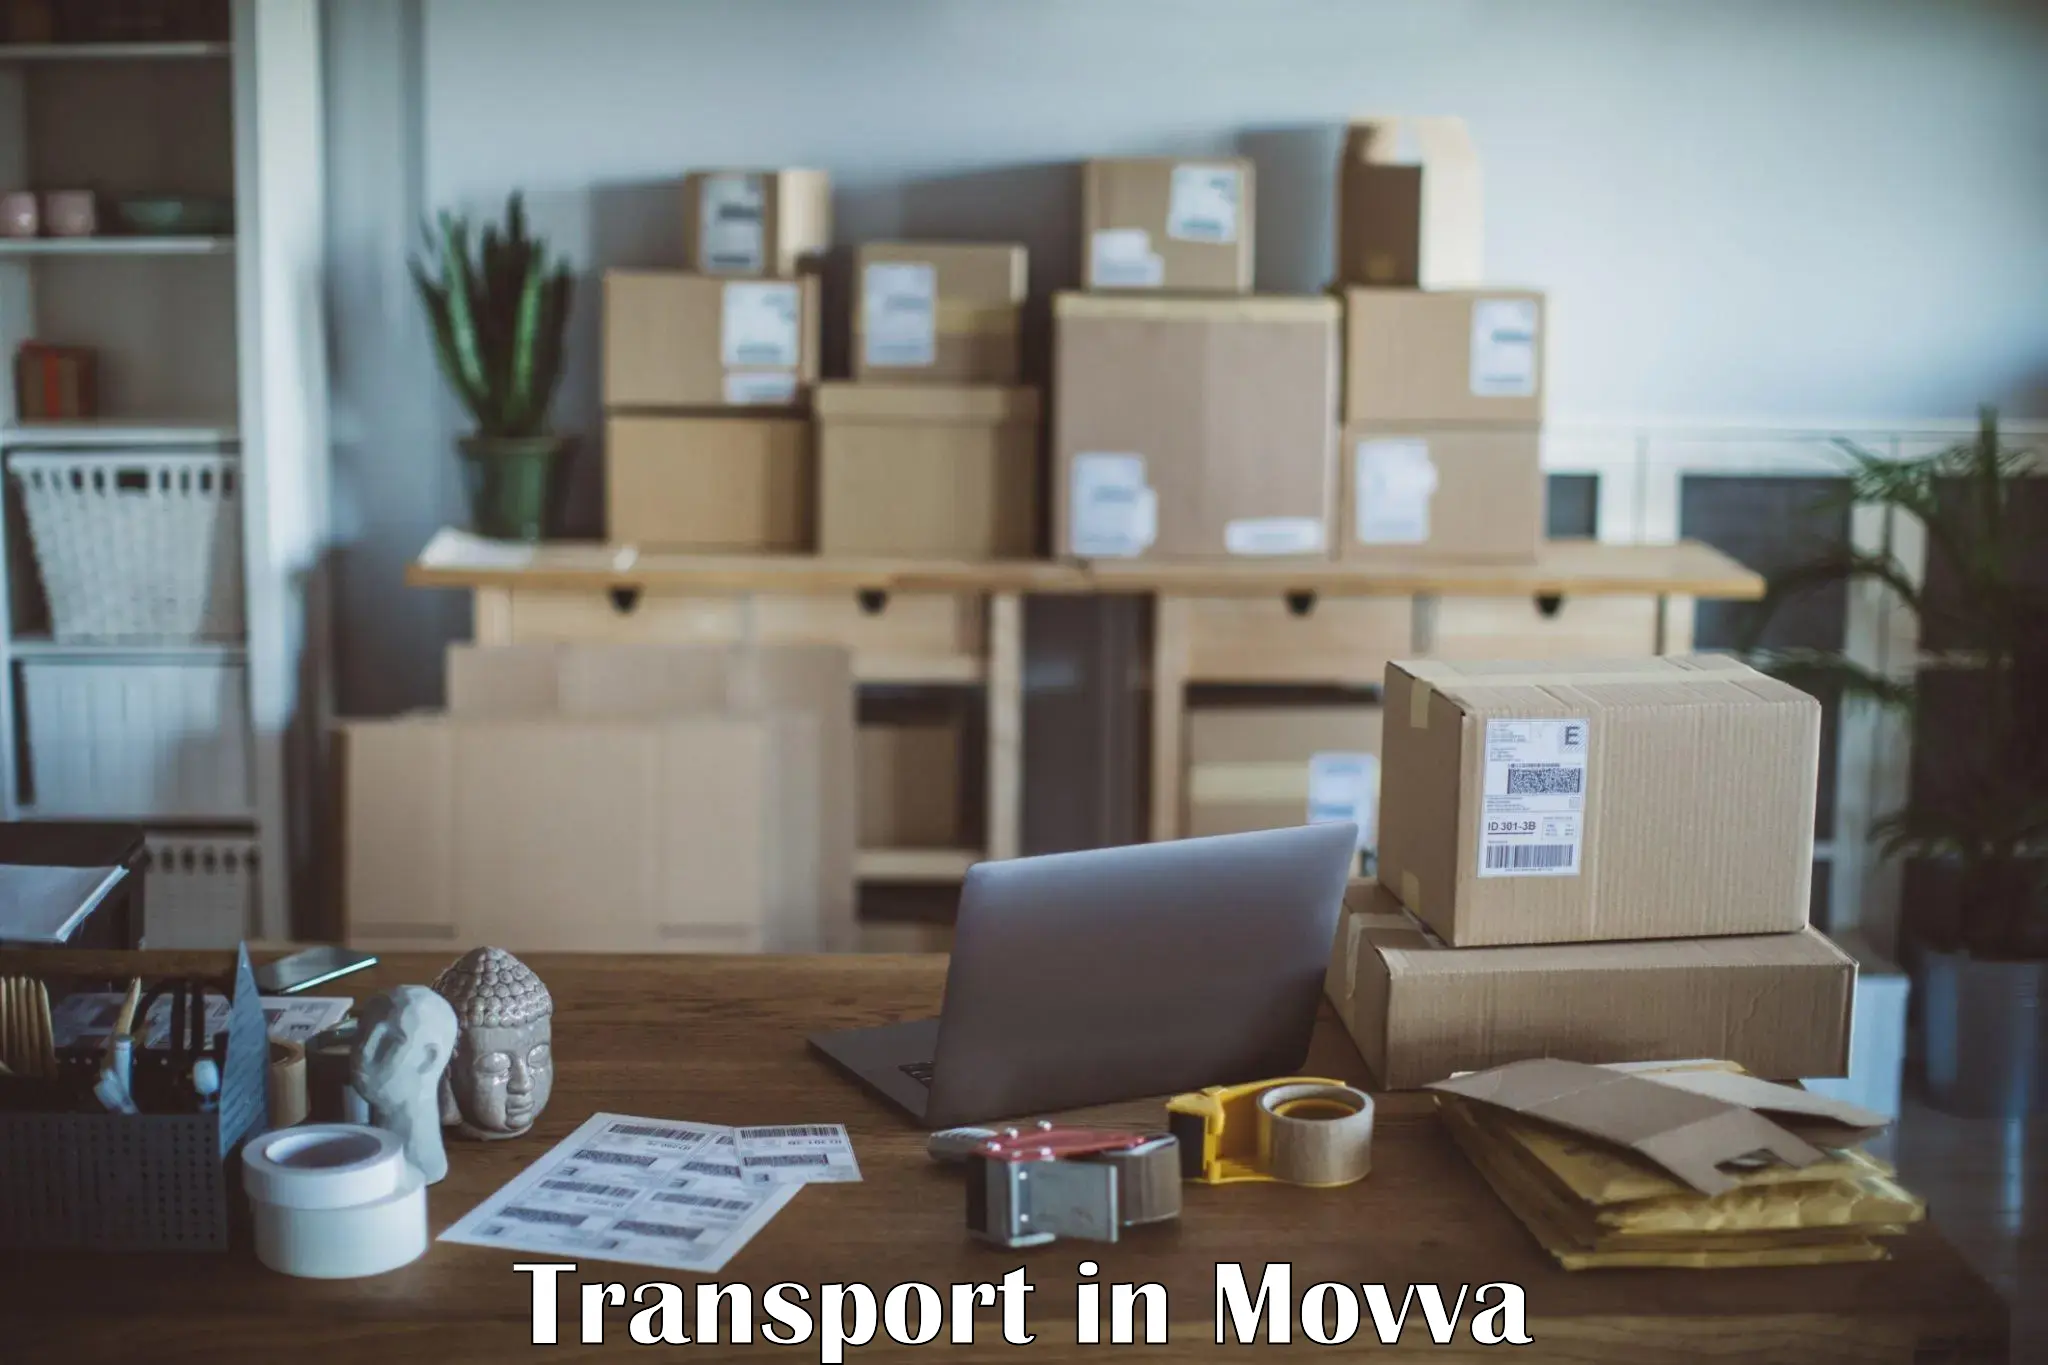 Pick up transport service in Movva